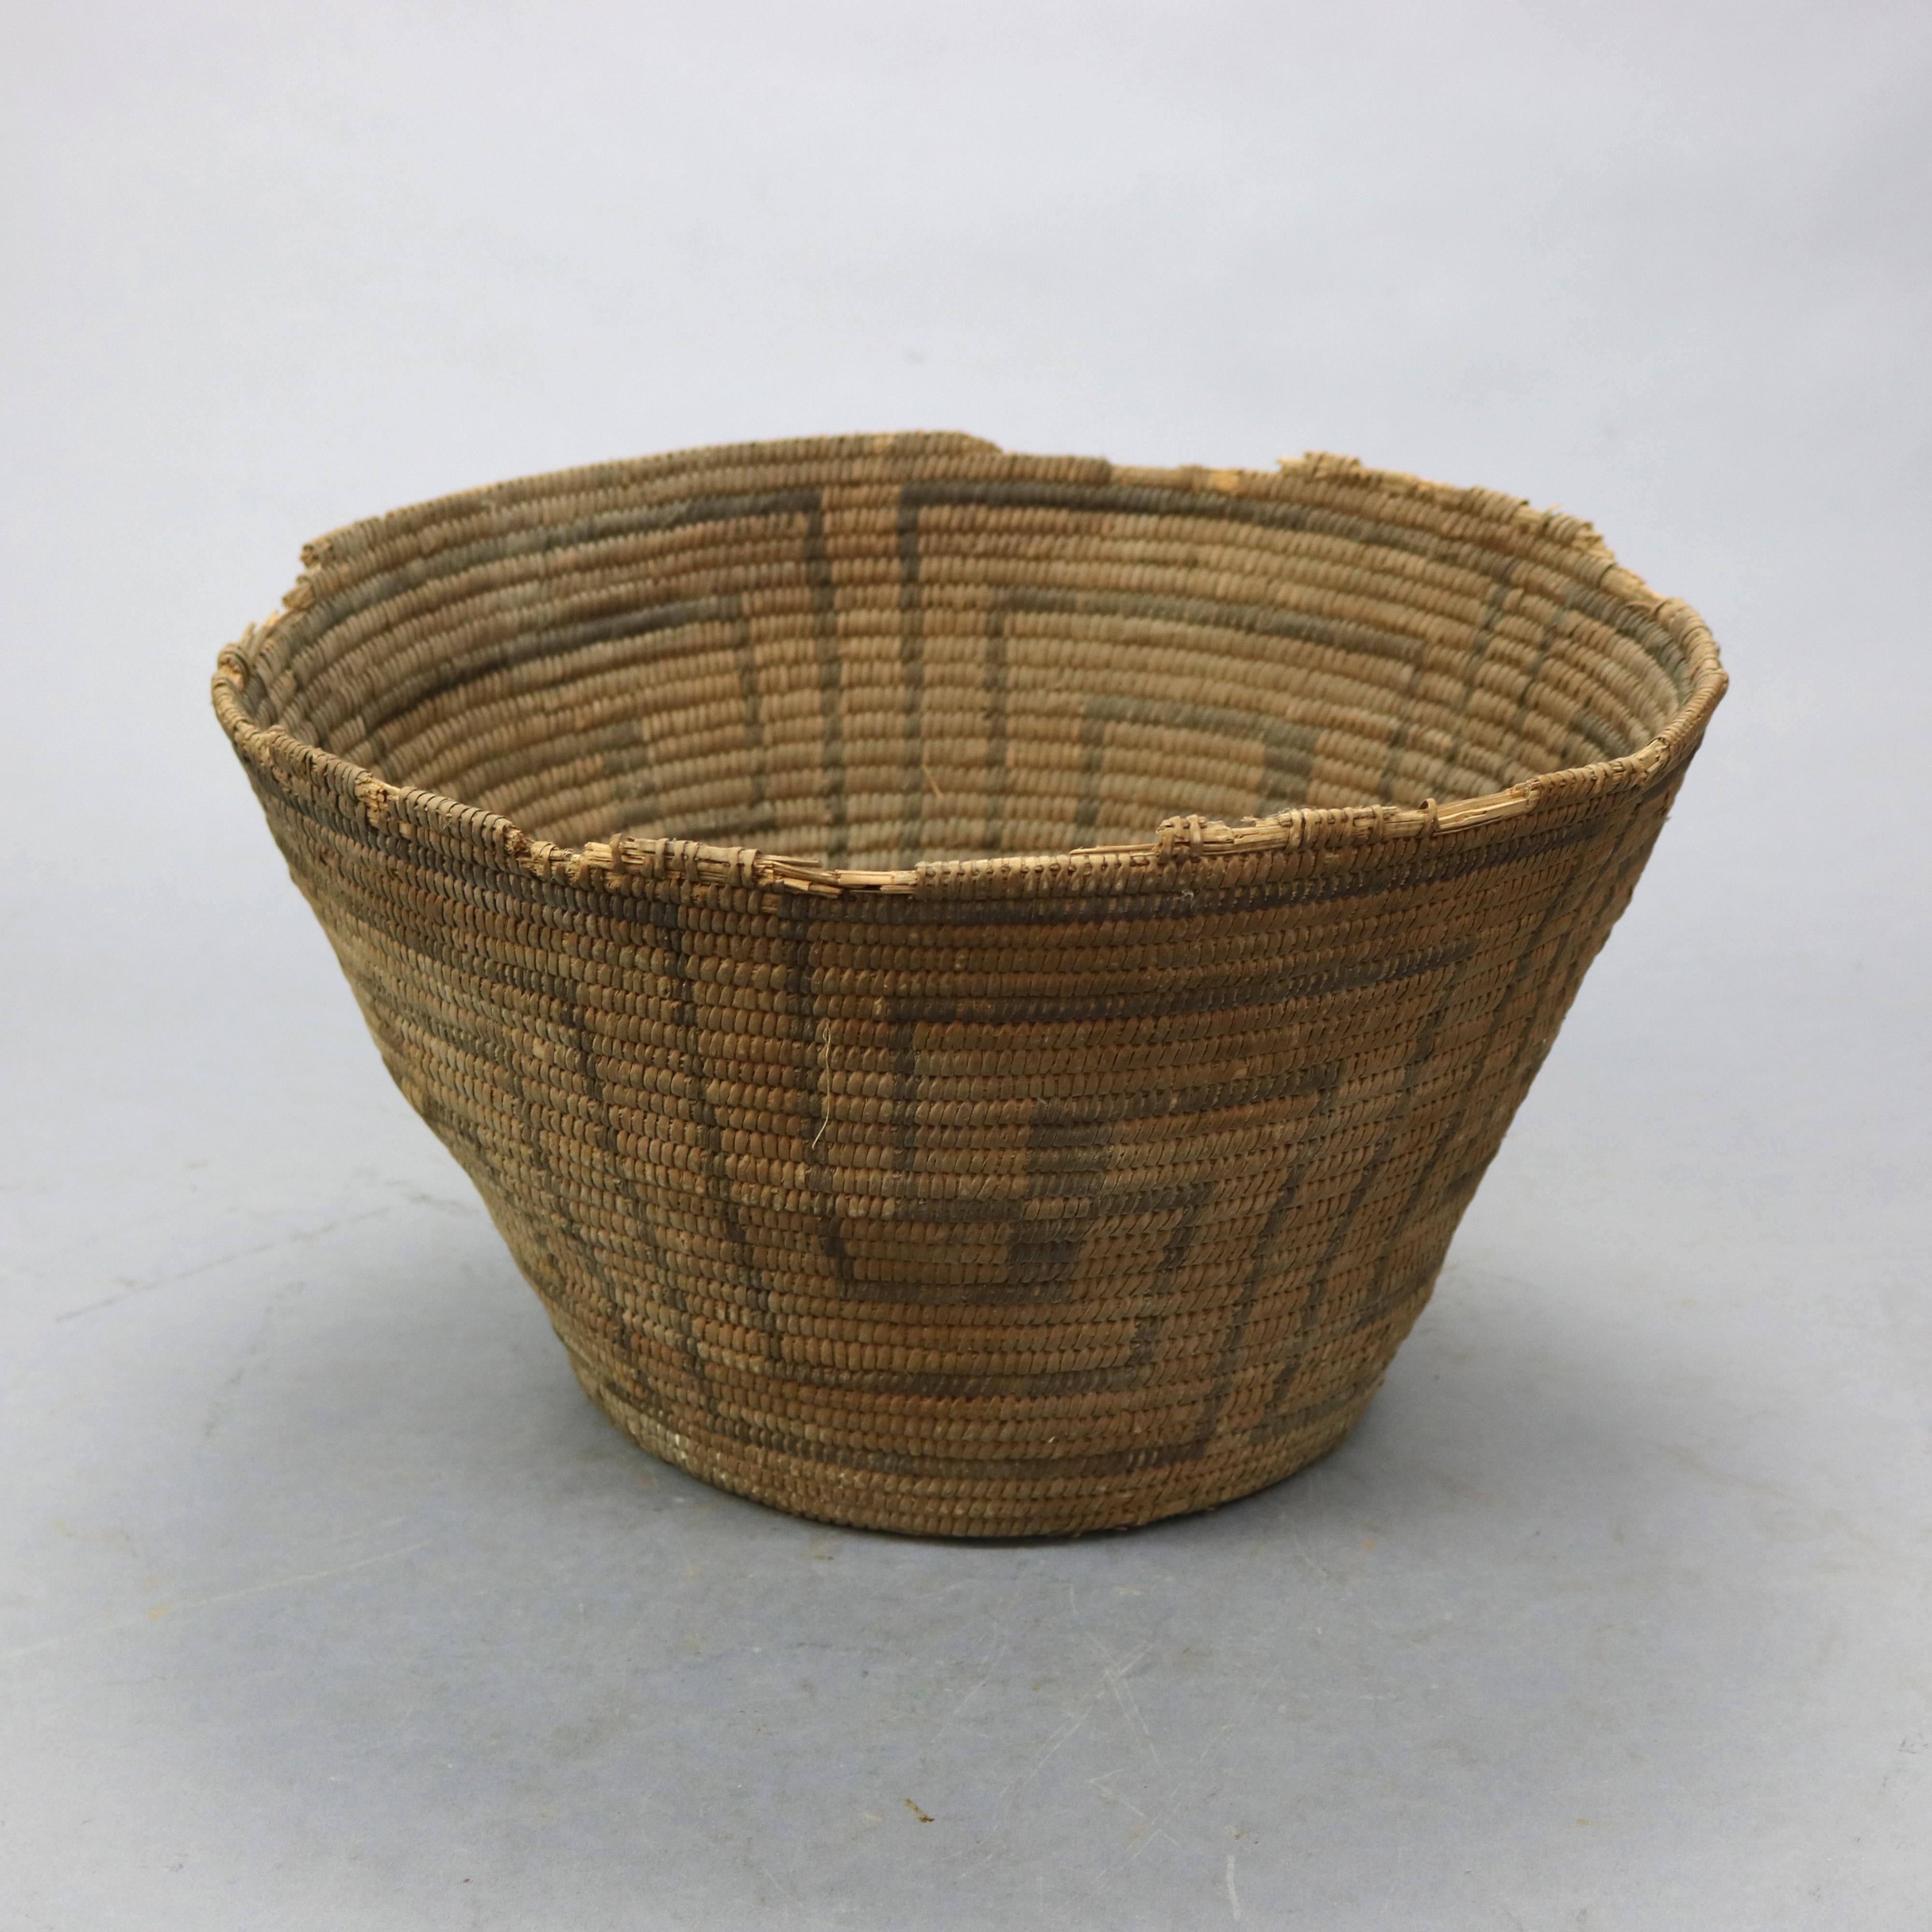 An antique Navajo American Indian basket offers hand woven reed construction in flared form with repeating geometric Whirling Log good luck design , circa 1920

Measures - 8.25''H x 12.5''W x 12.5''D.